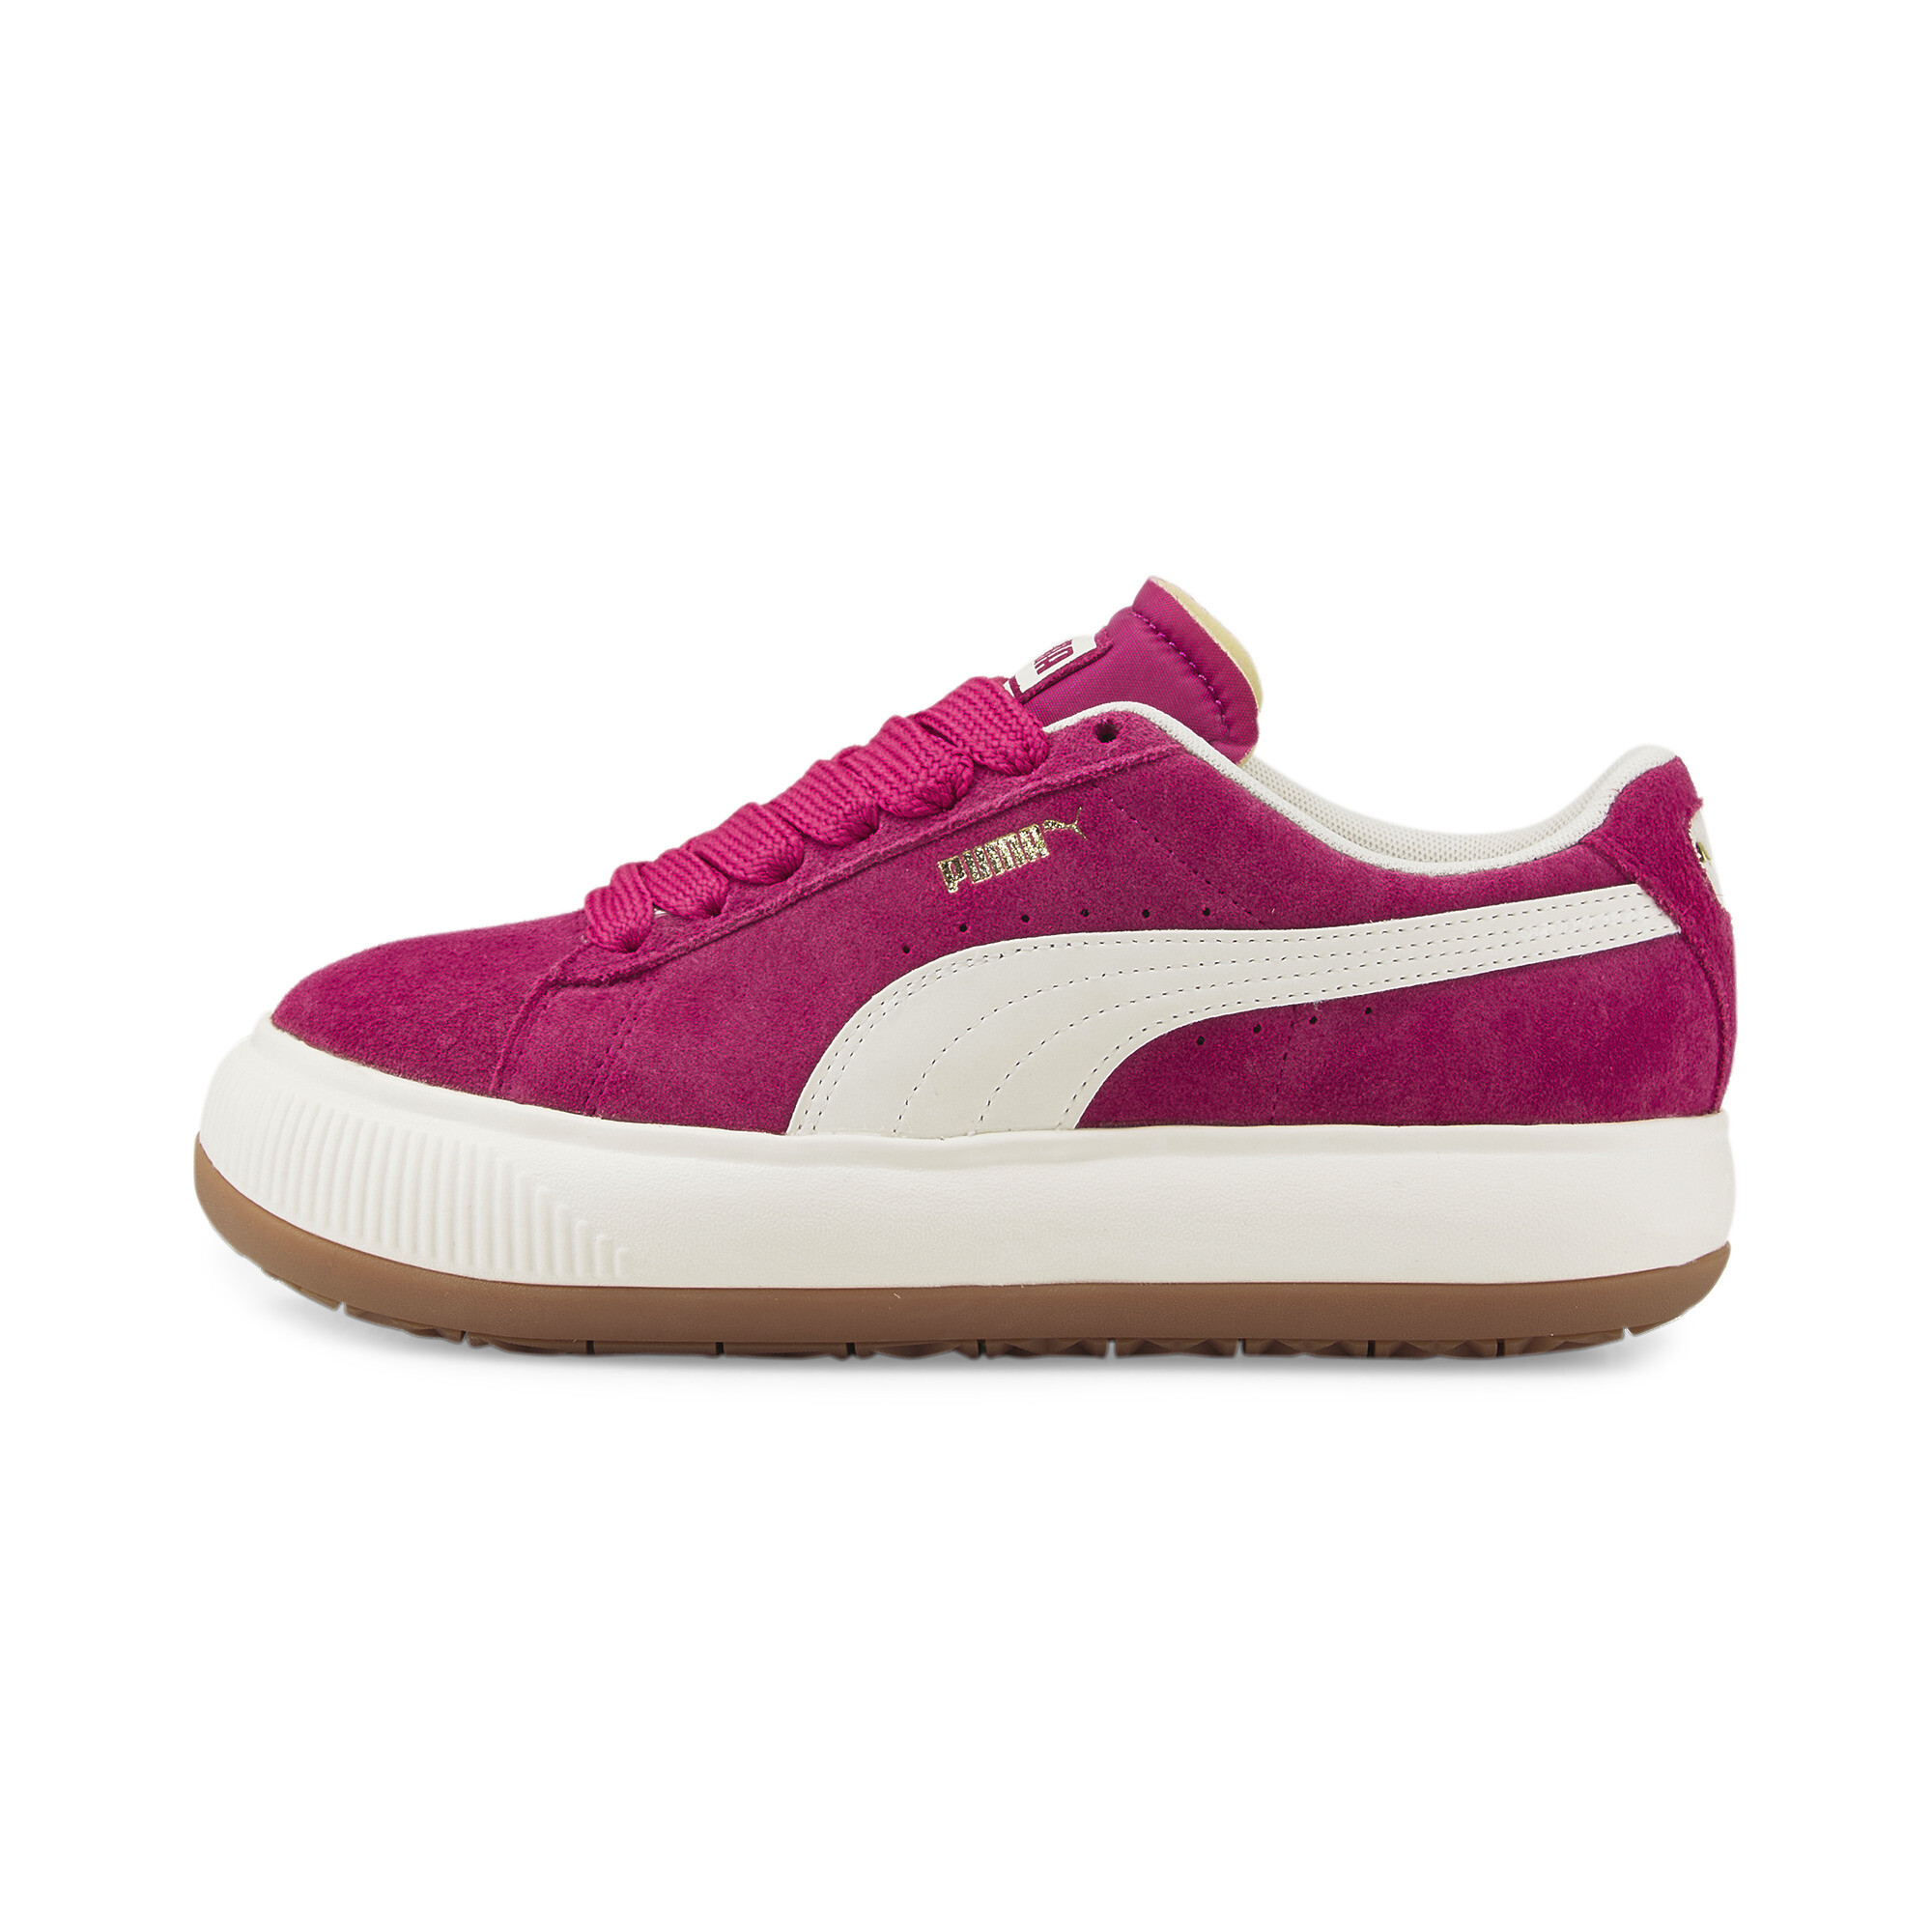 puma shoes for women black and pink